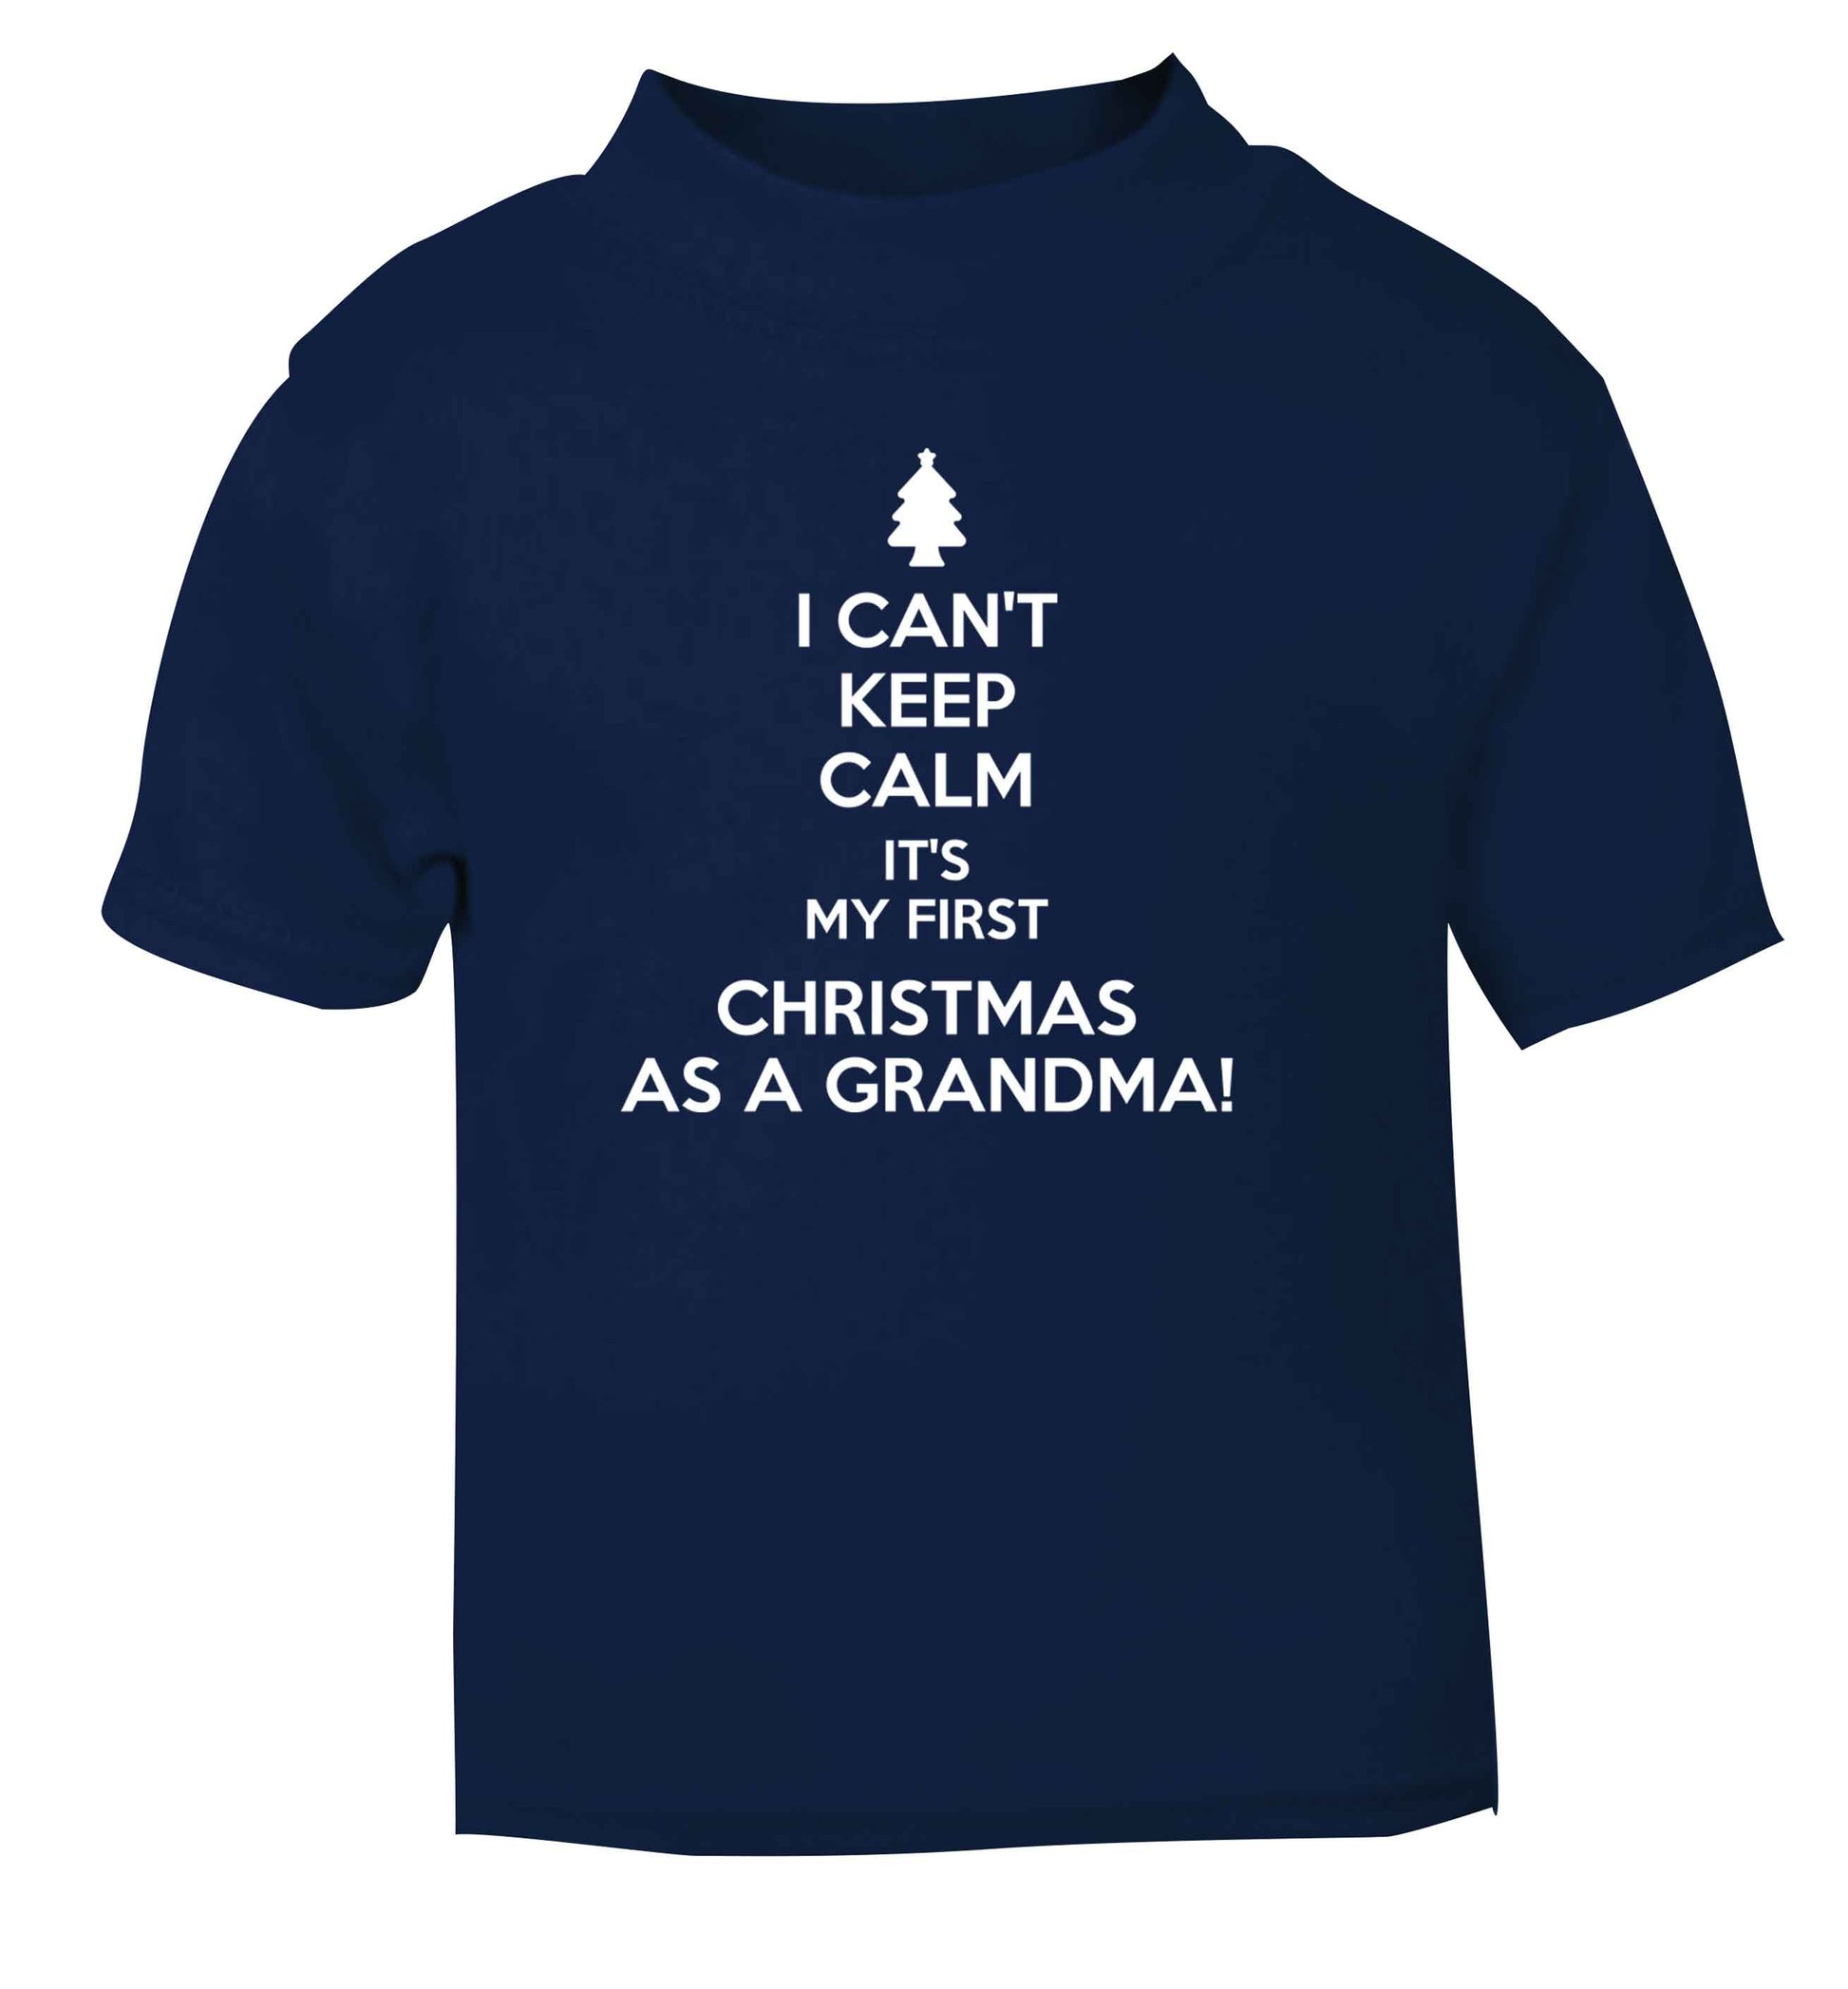 I can't keep calm it's my first Christmas as a grandma! navy Baby Toddler Tshirt 2 Years